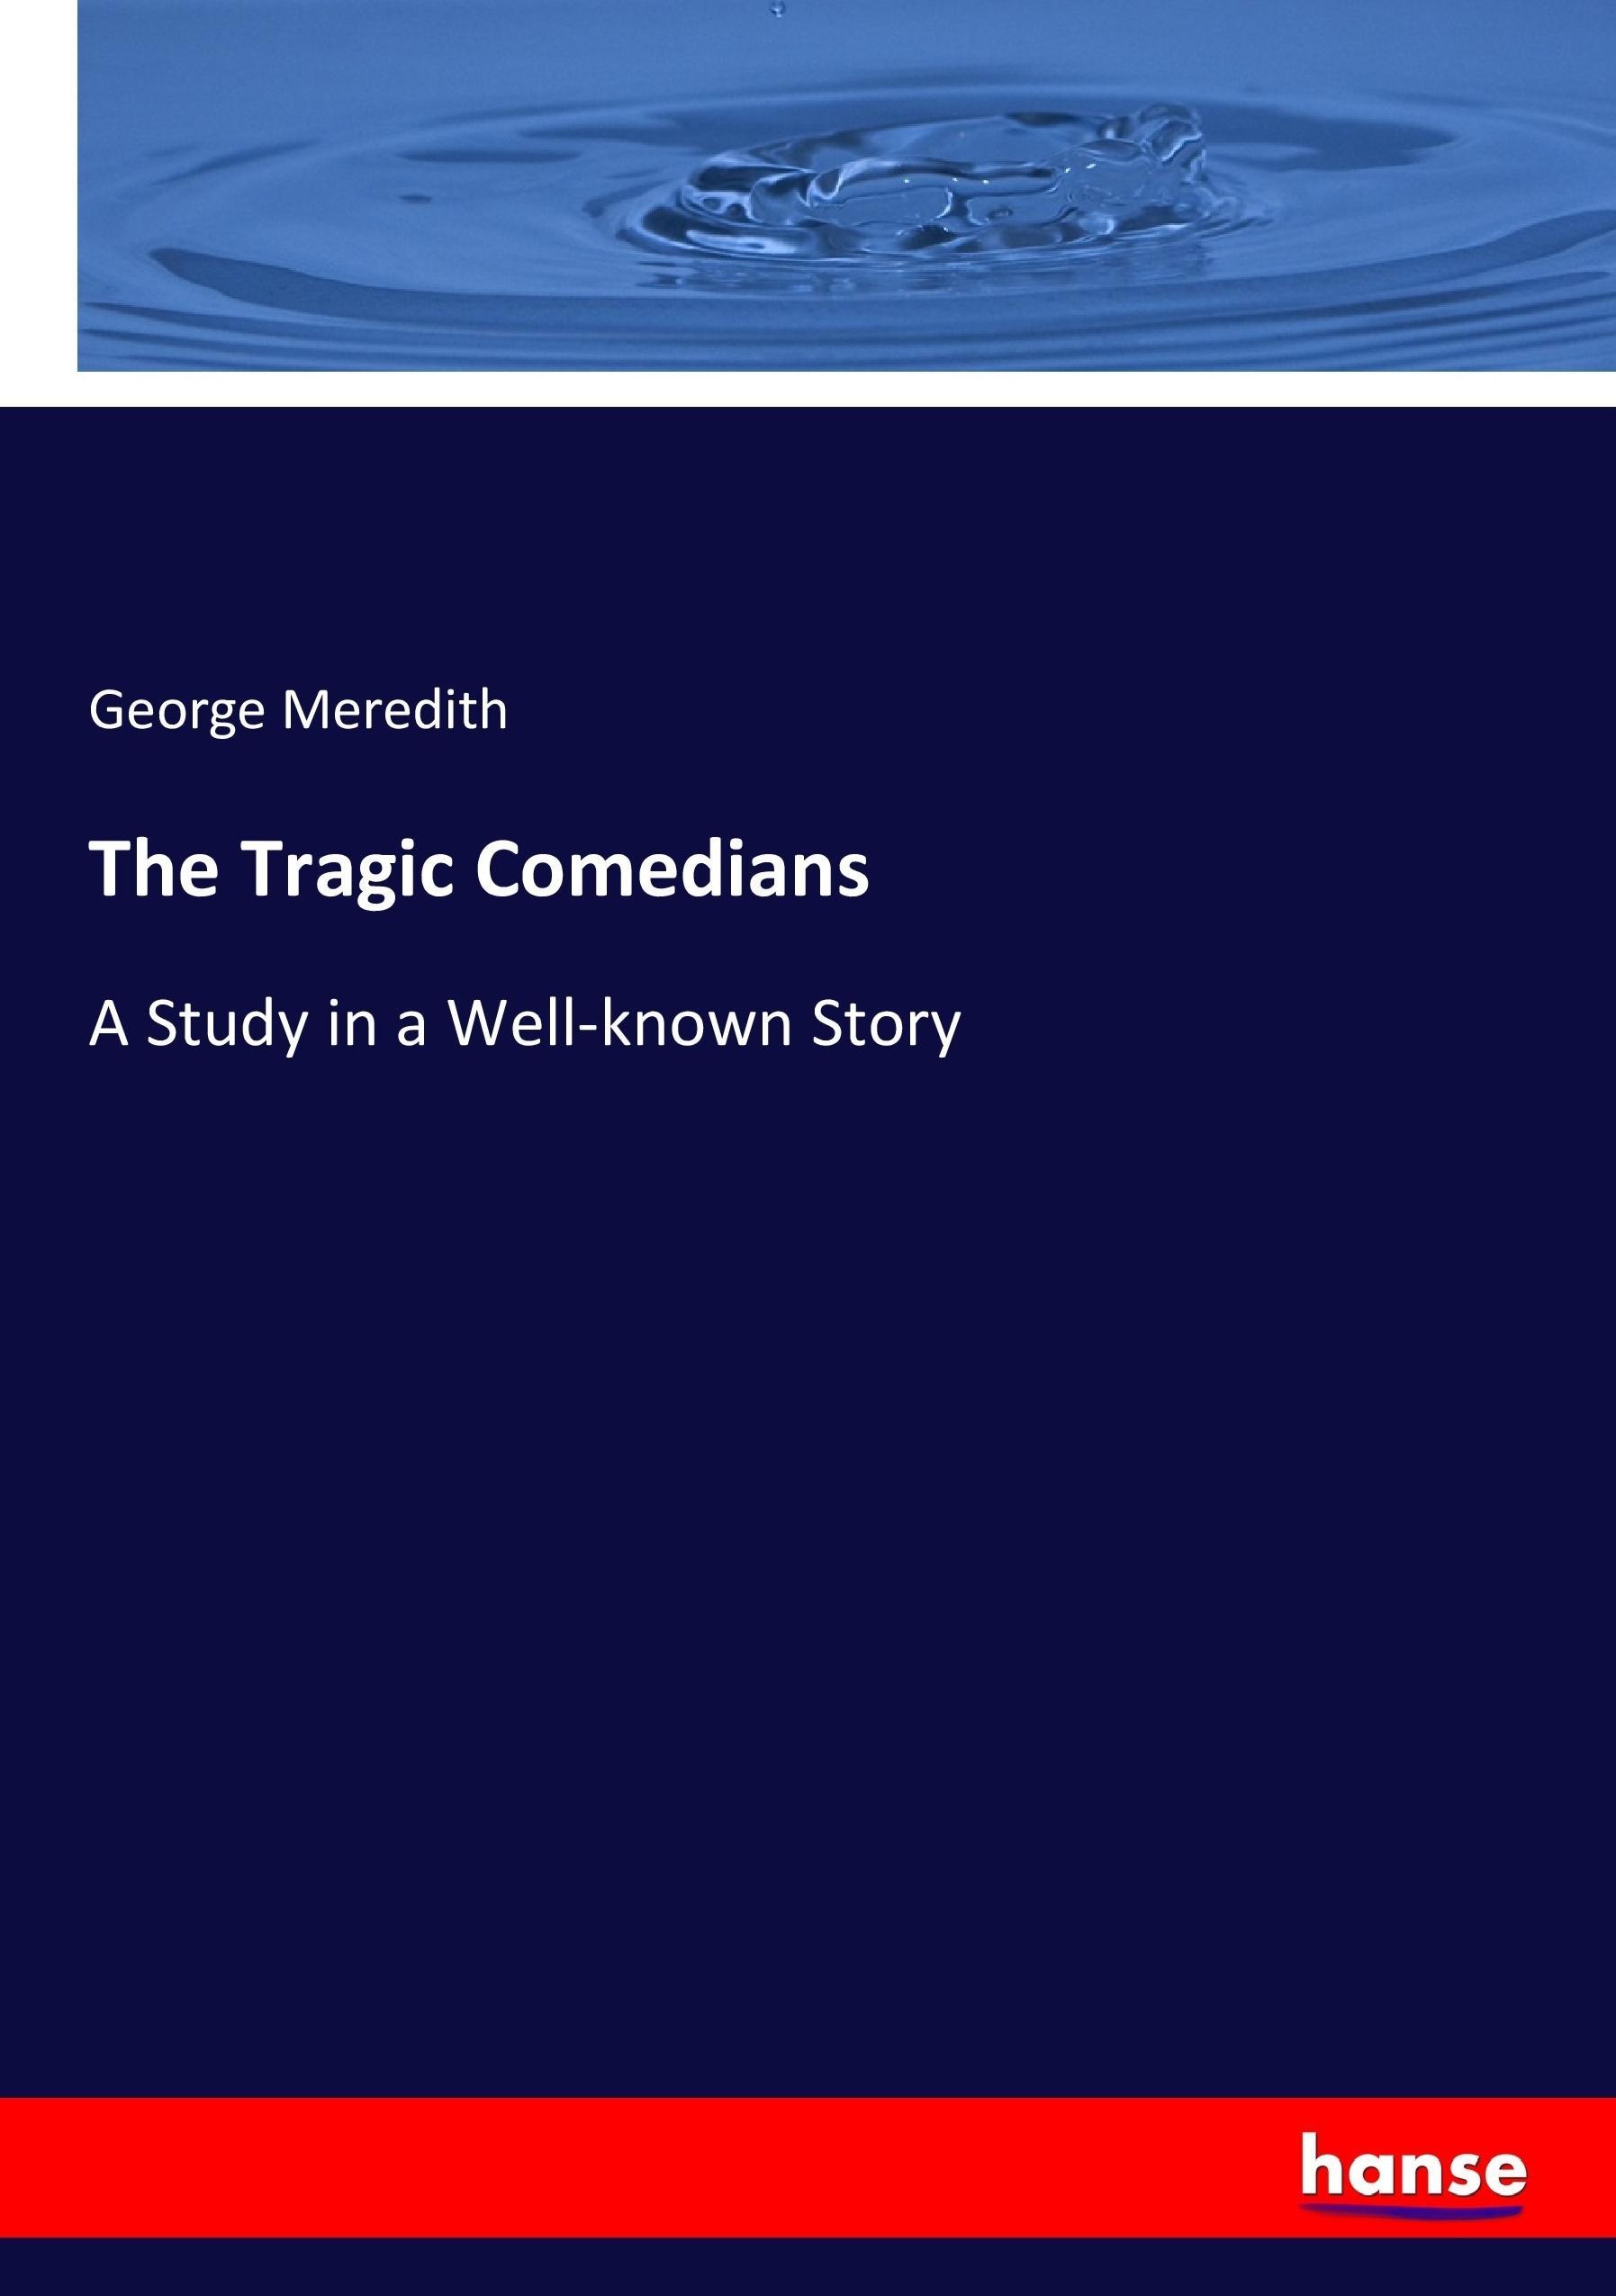 The Tragic Comedians | A Study in a Well-known Story | George Meredith | Taschenbuch | Paperback | 264 S. | Englisch | 2017 | hansebooks | EAN 9783744782685 - Meredith, George